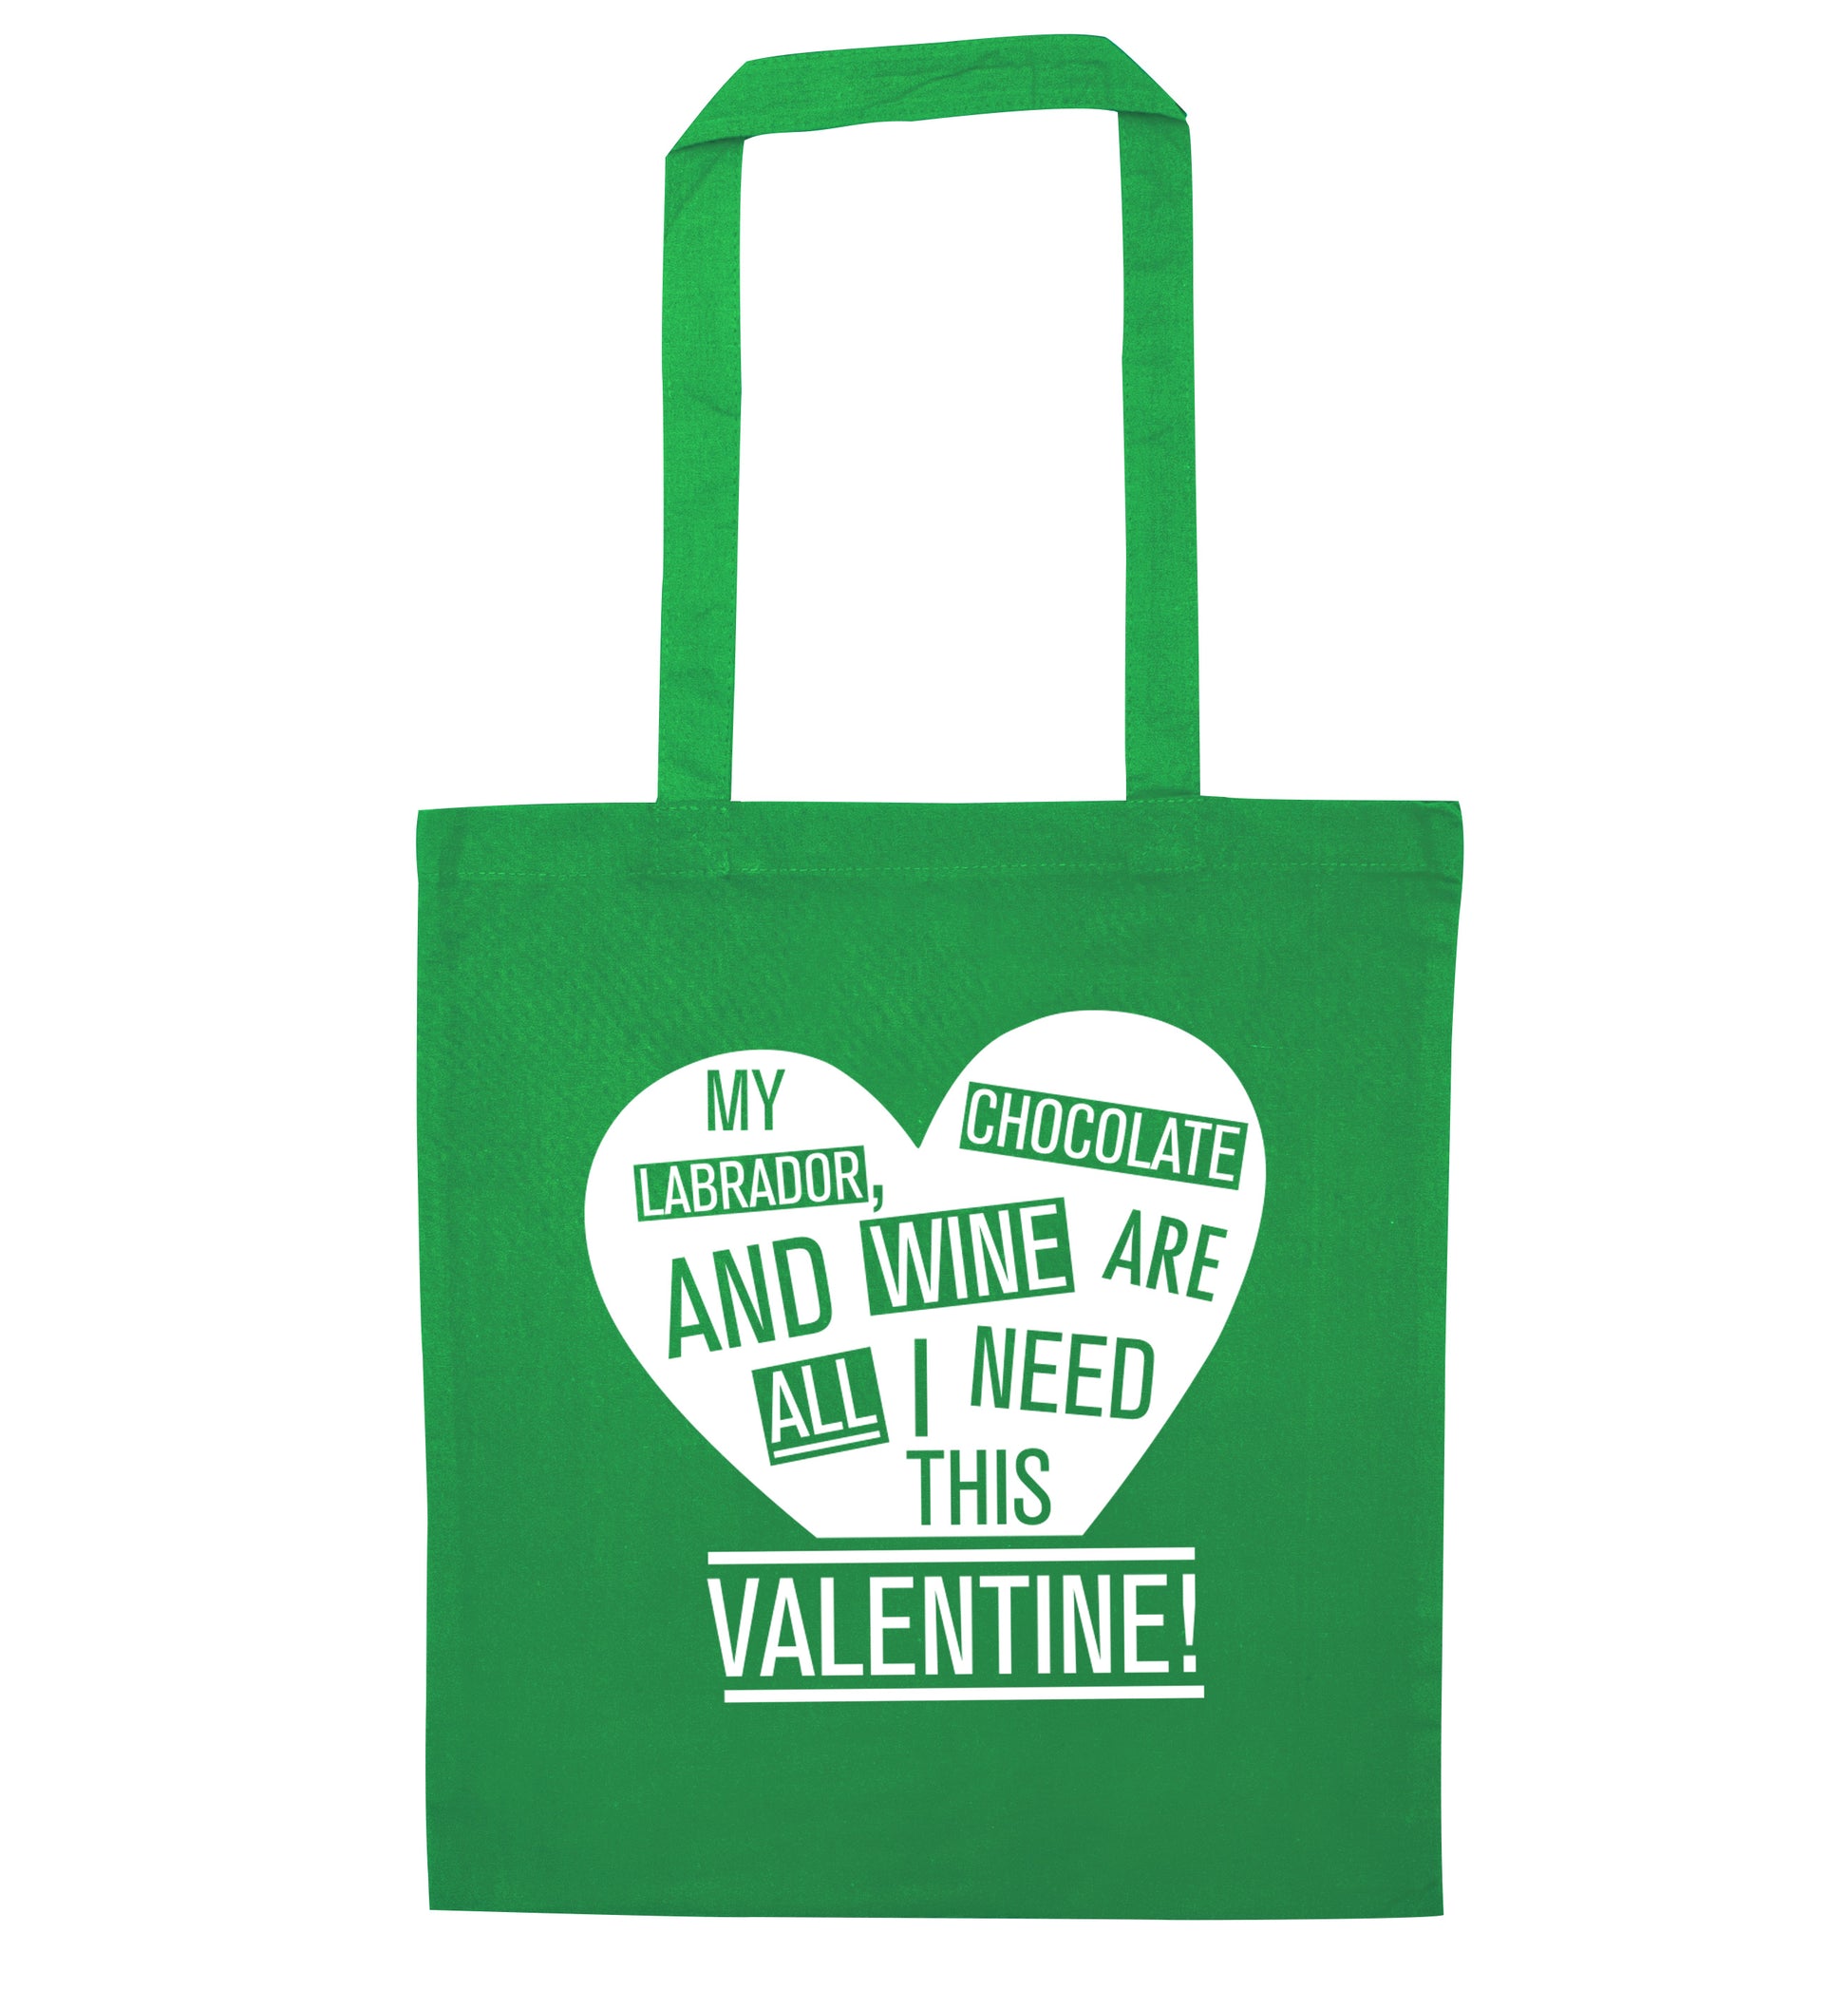 My labrador, chocolate and wine are all I need this valentine! green tote bag